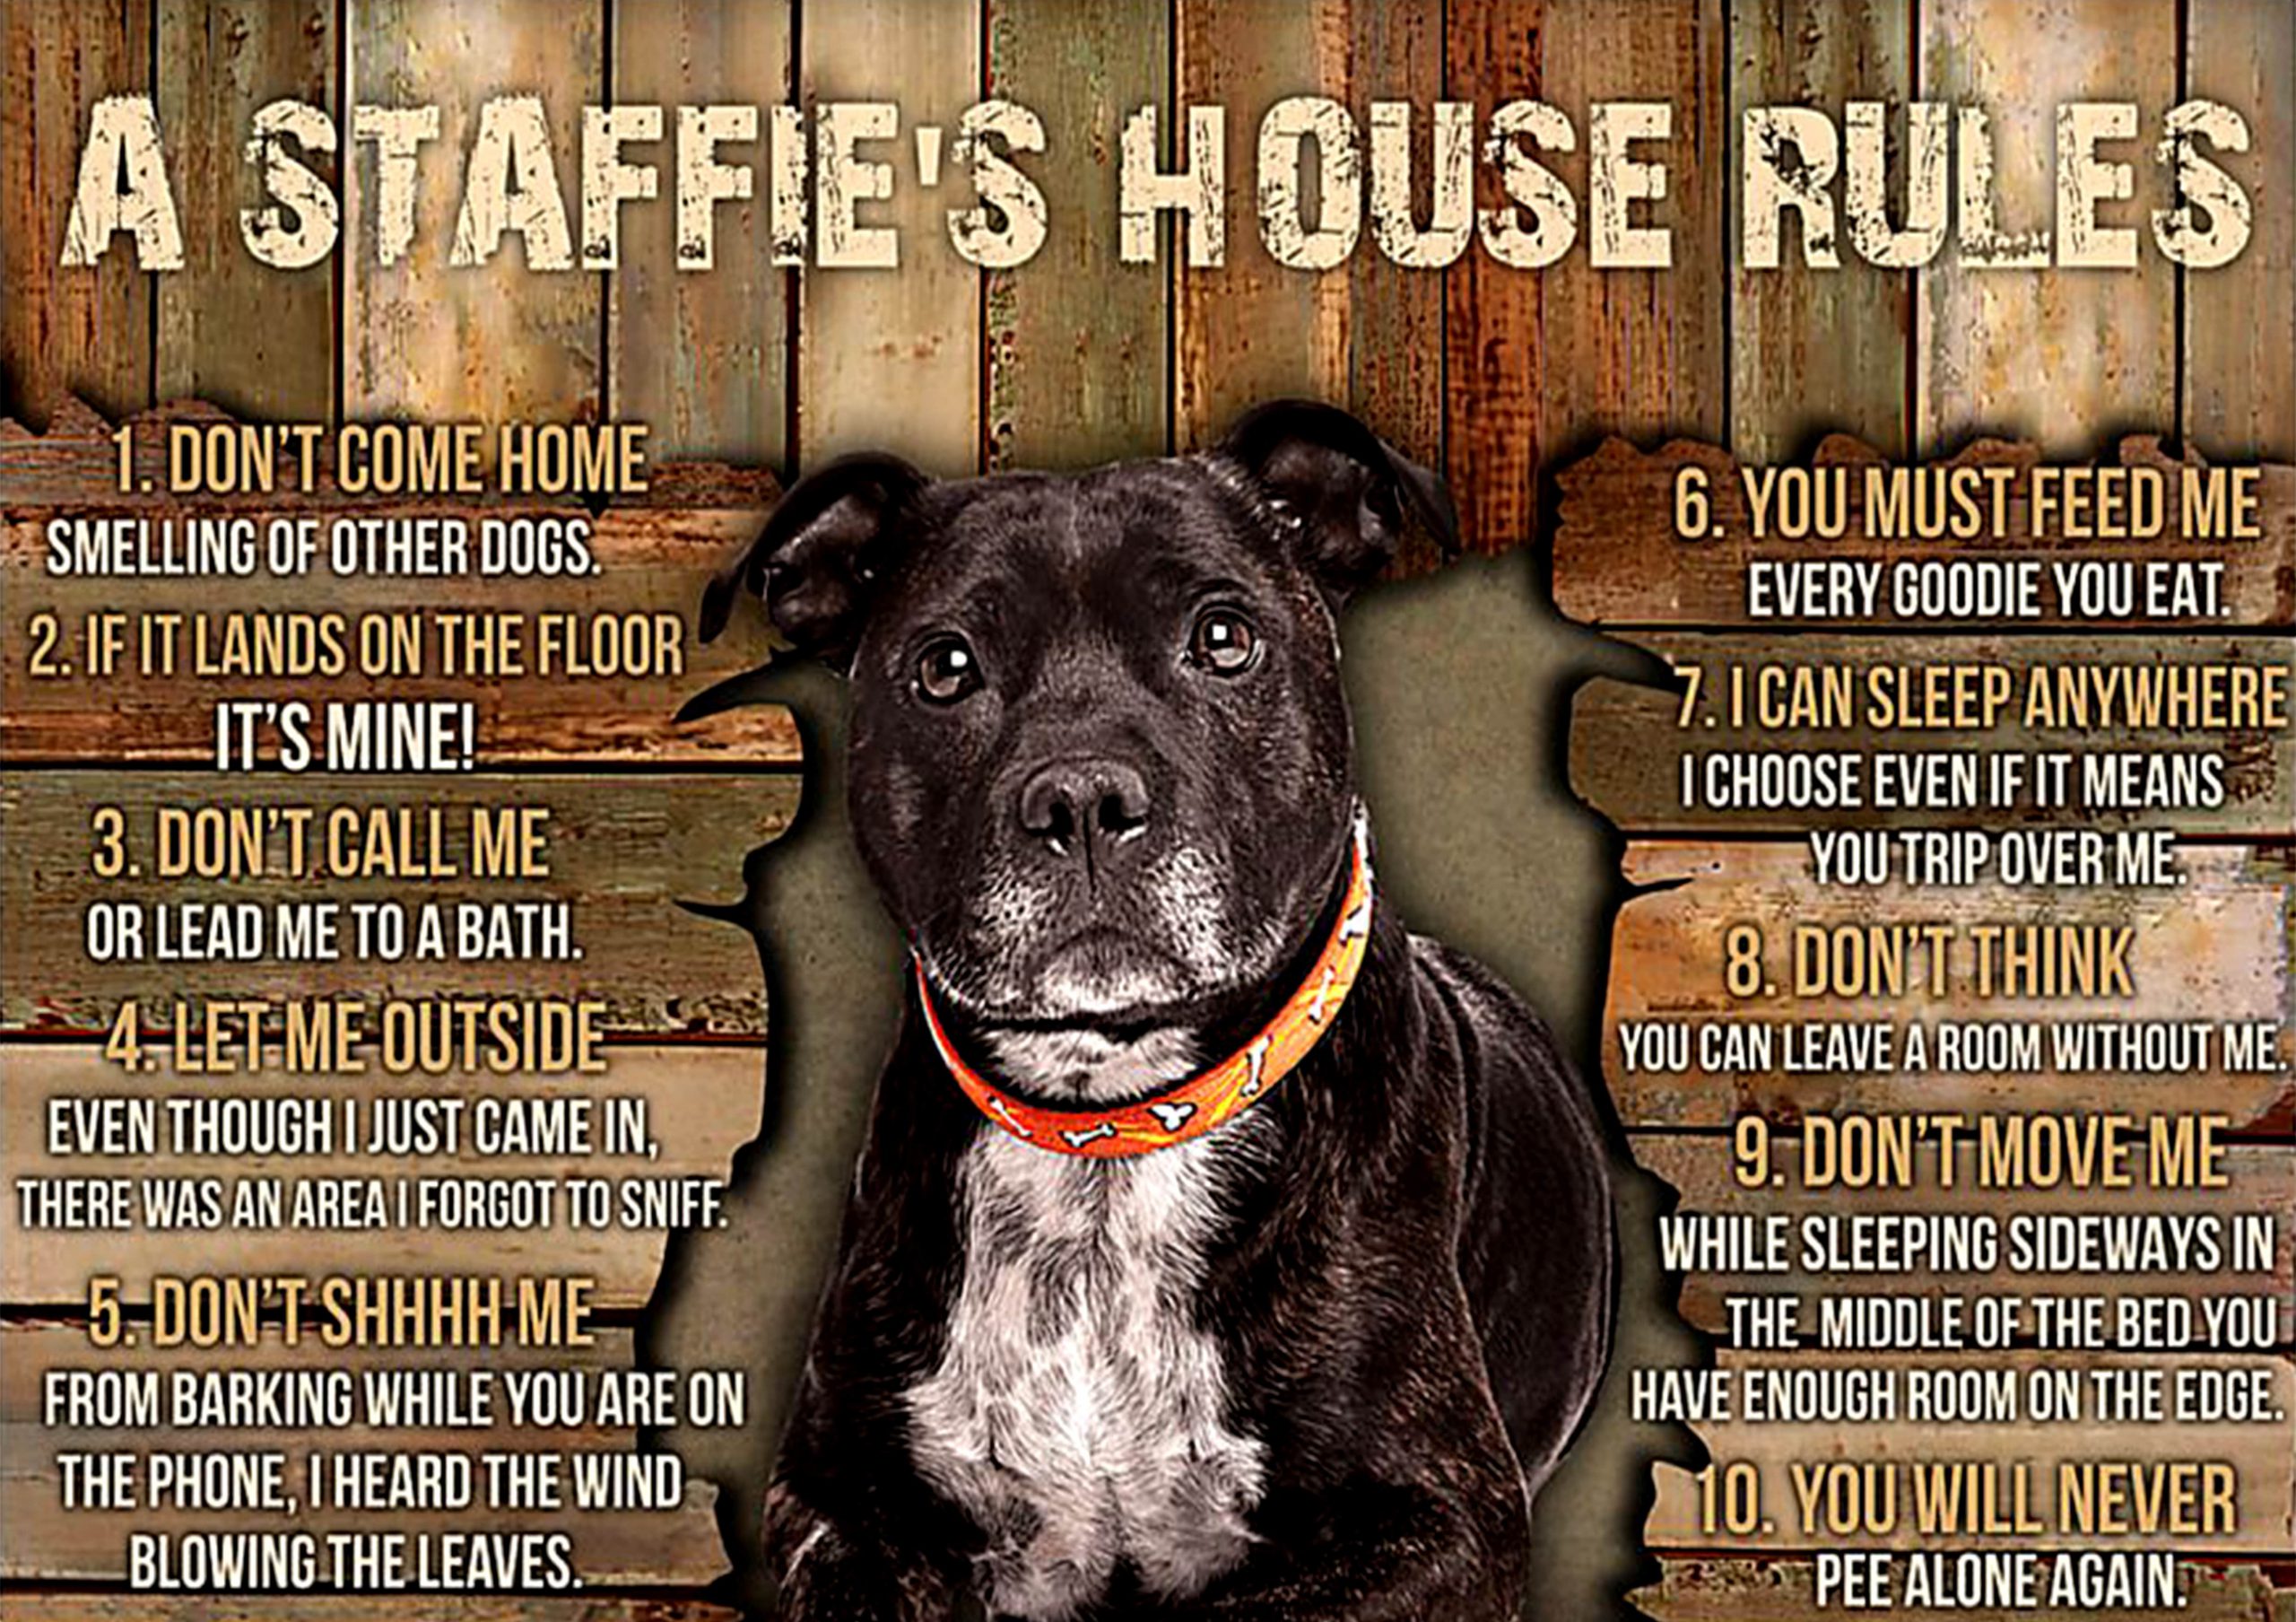 dog lover a staffies house rules poster 1